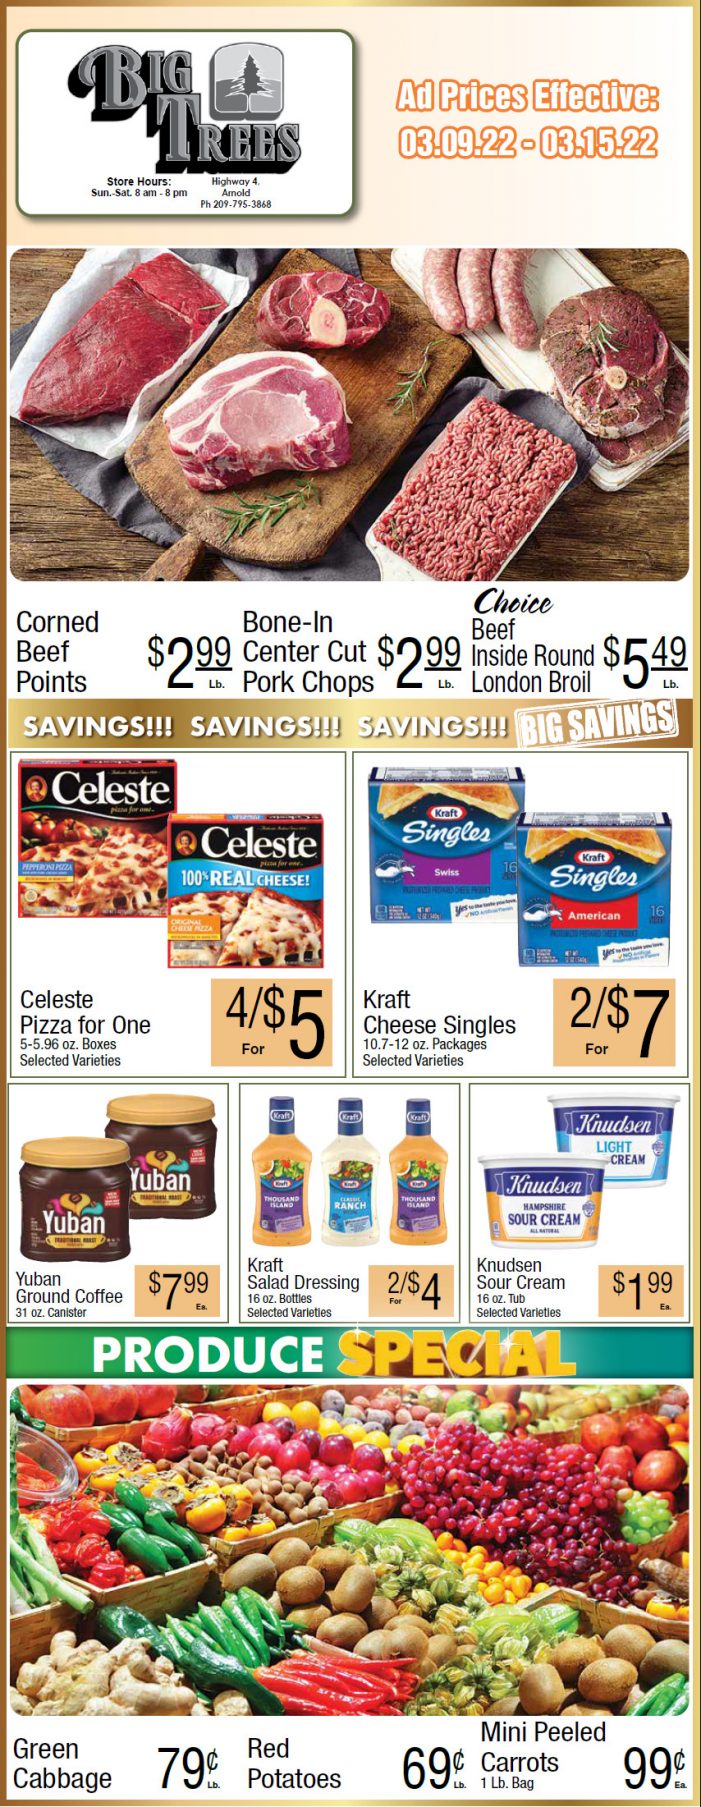 Big Trees Market Weekly Ad & Grocery Specials March 9th Through March 15th! Shop Local & Save!